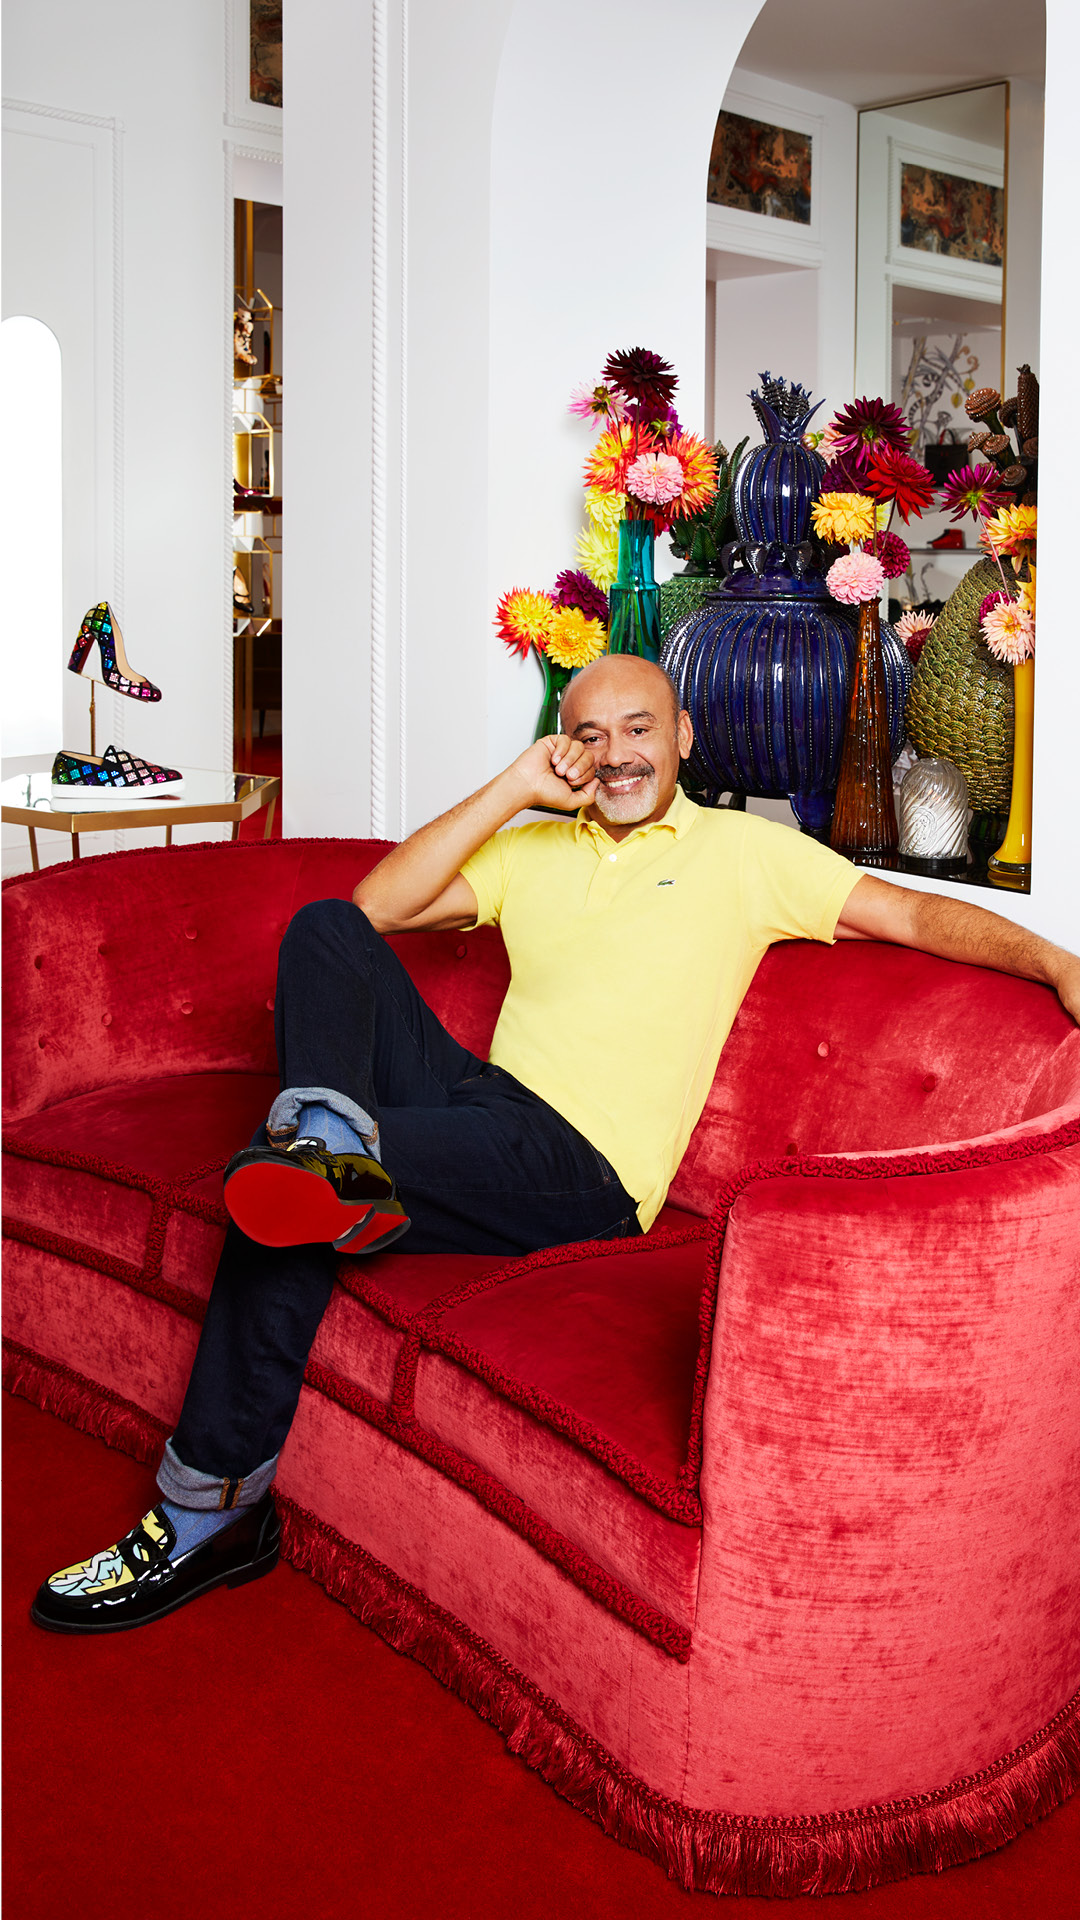 Interview: Christian Louboutin On A Life Spent On The Dancefloor